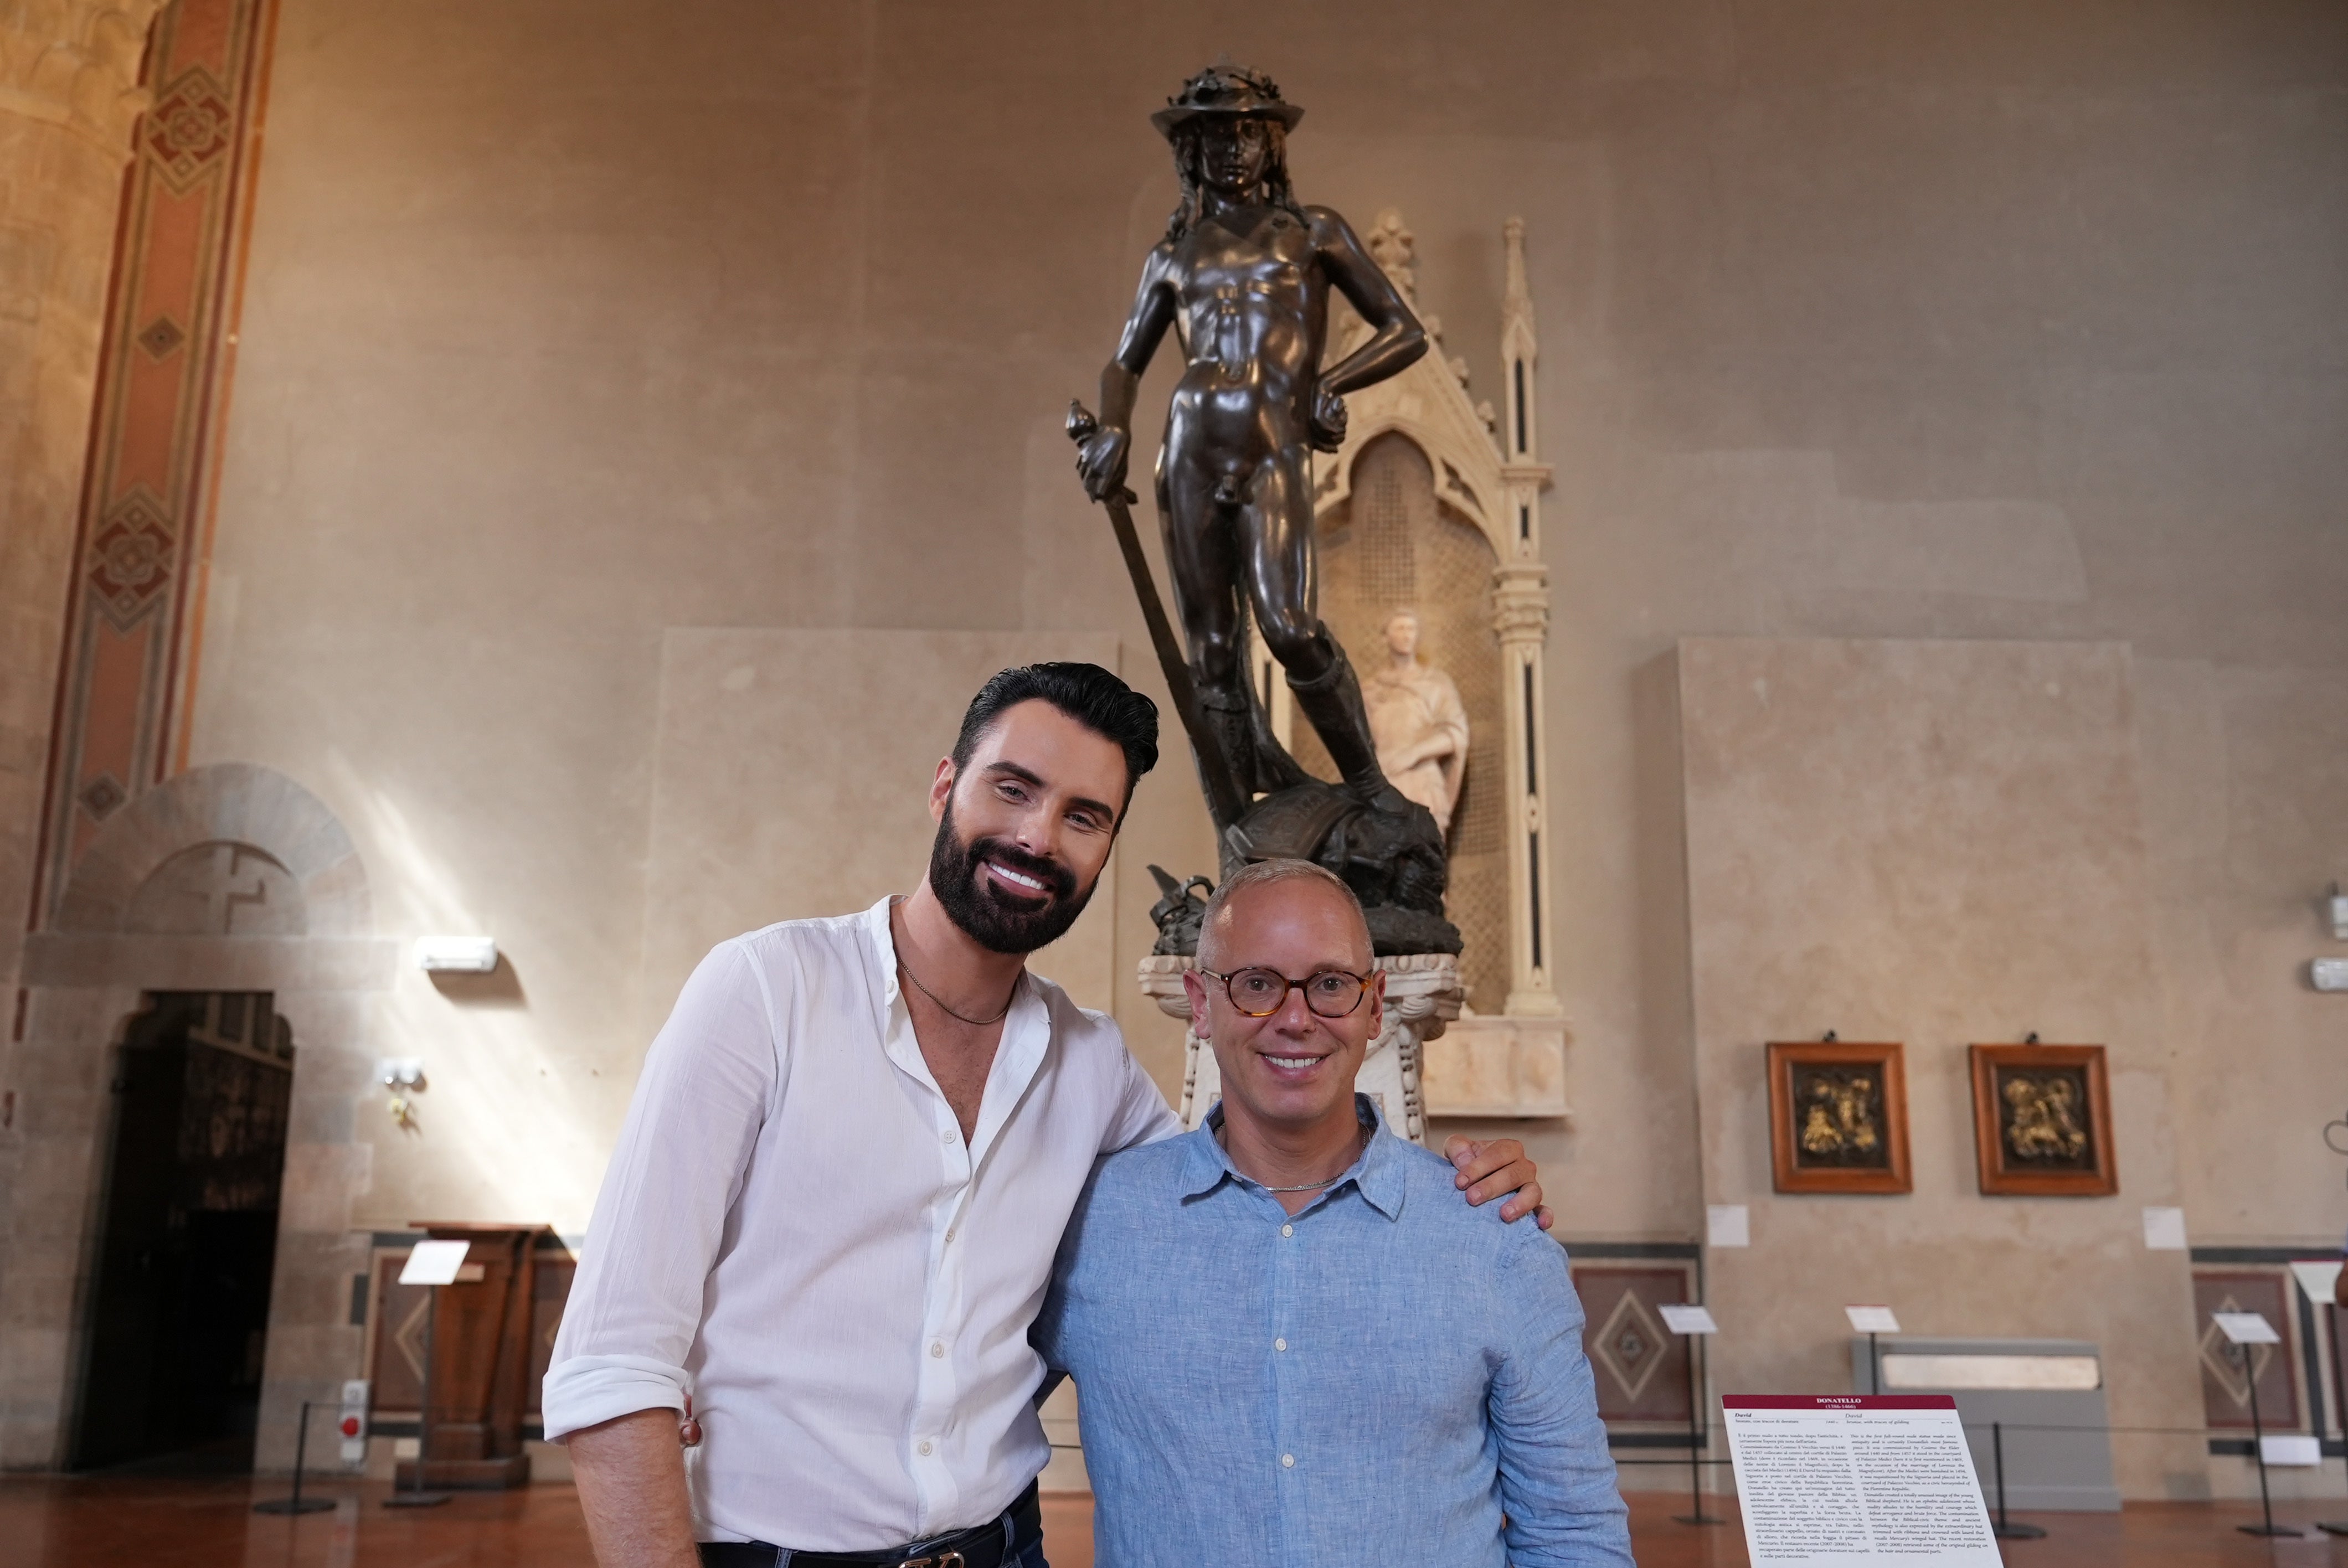 The pair visited Michelangelo’s David in Renaissance Florence